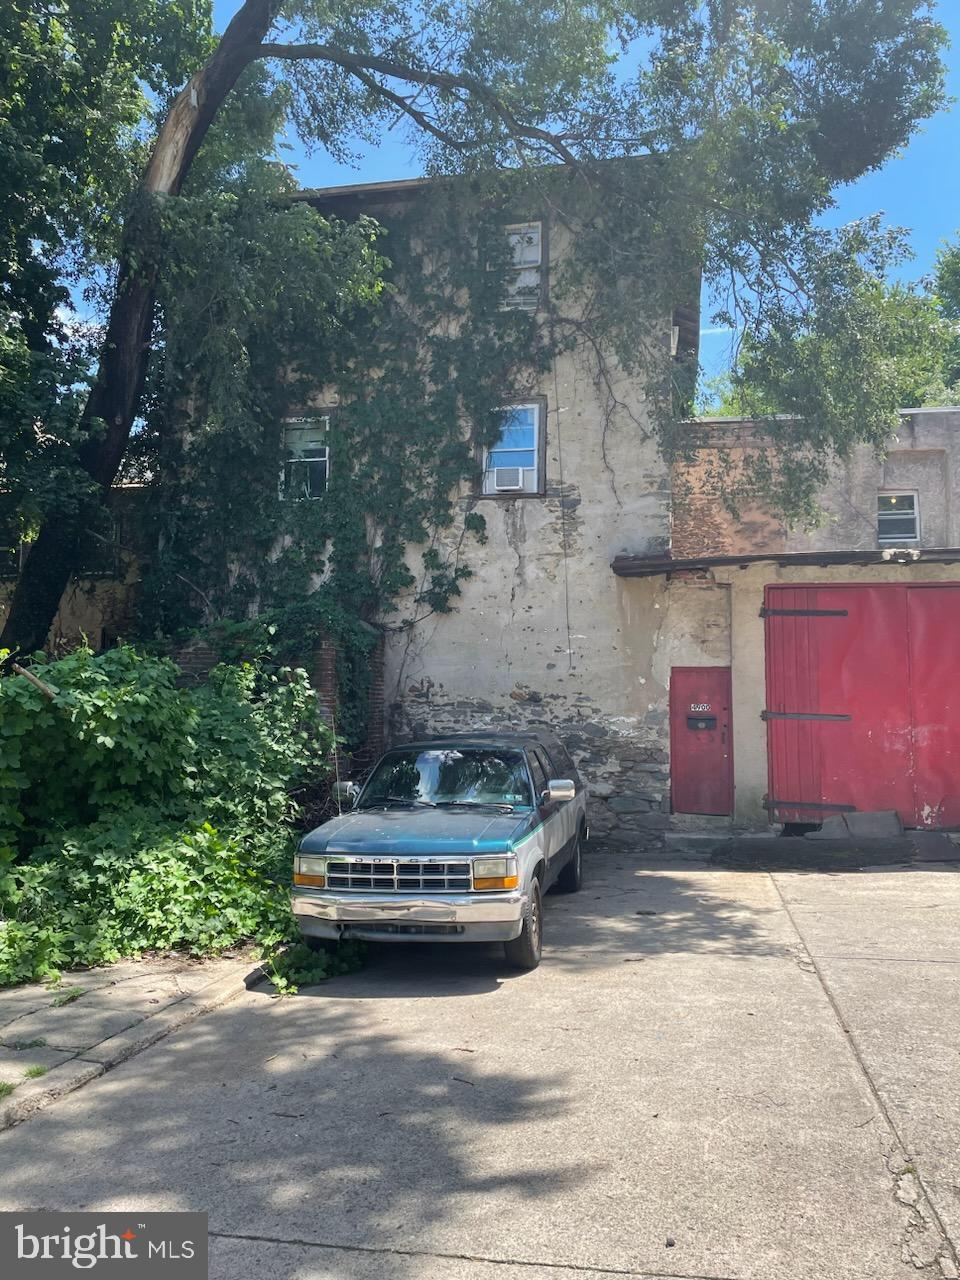 a car parked in front of a brick house